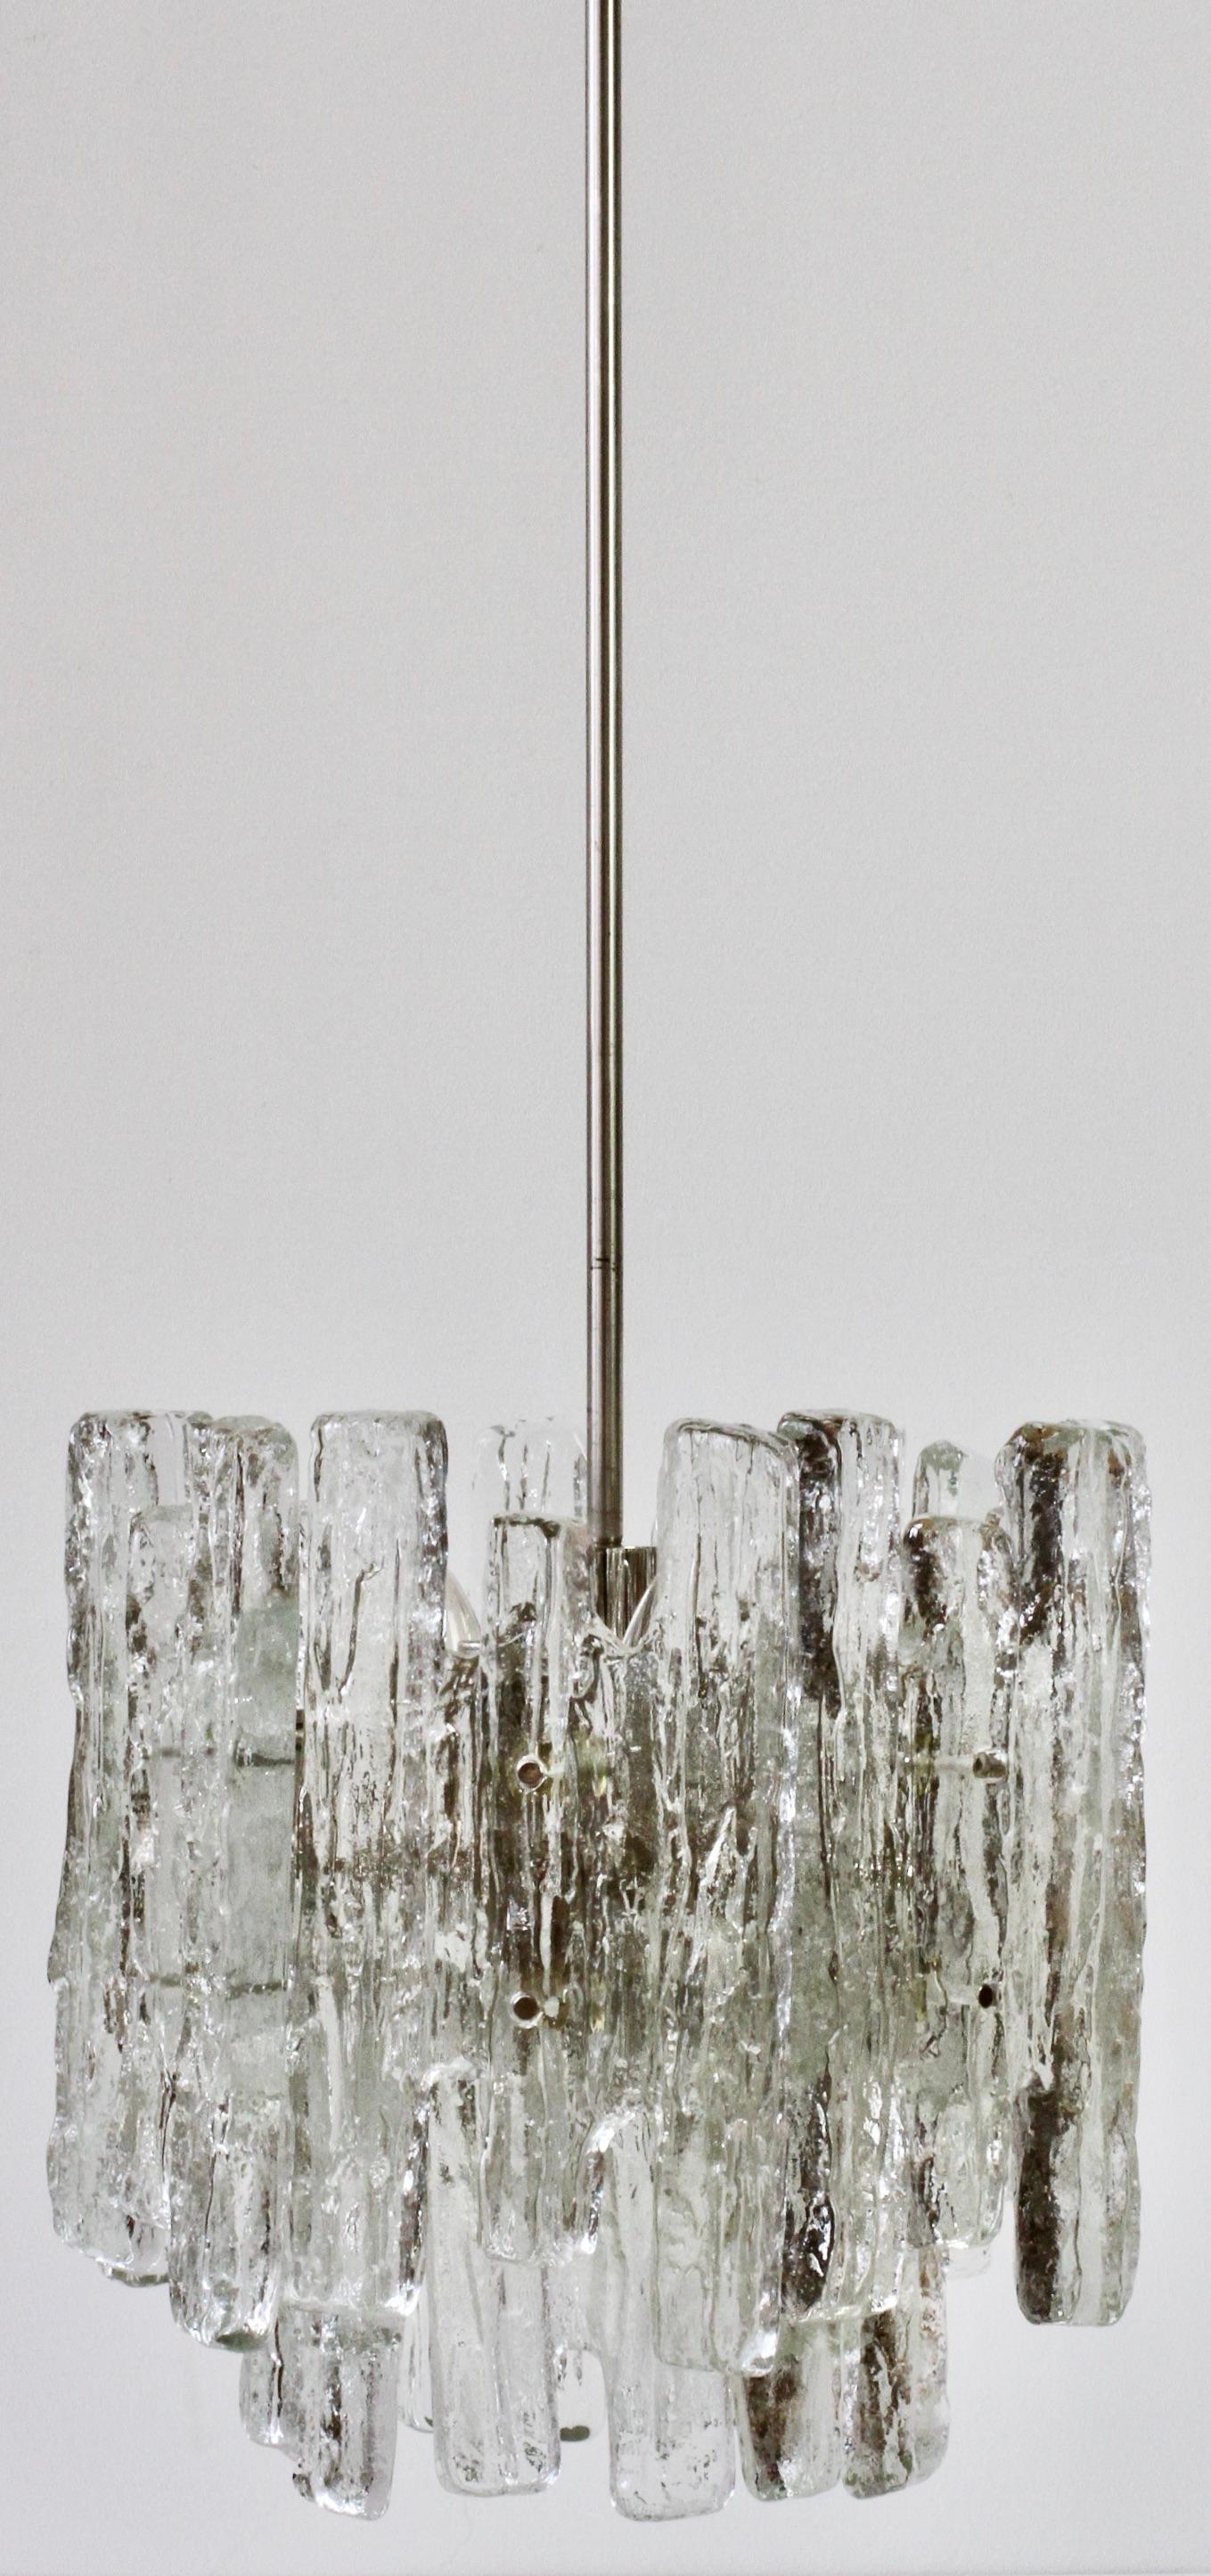 One of a pair of vintage midcentury Austrian made textured clear ice glass ceiling pendant lights / lamps or chandeliers by Kalmar, circa 1974. Featuring twelve hanging glass elements (six large & six small) resembling melting ice crystals suspended